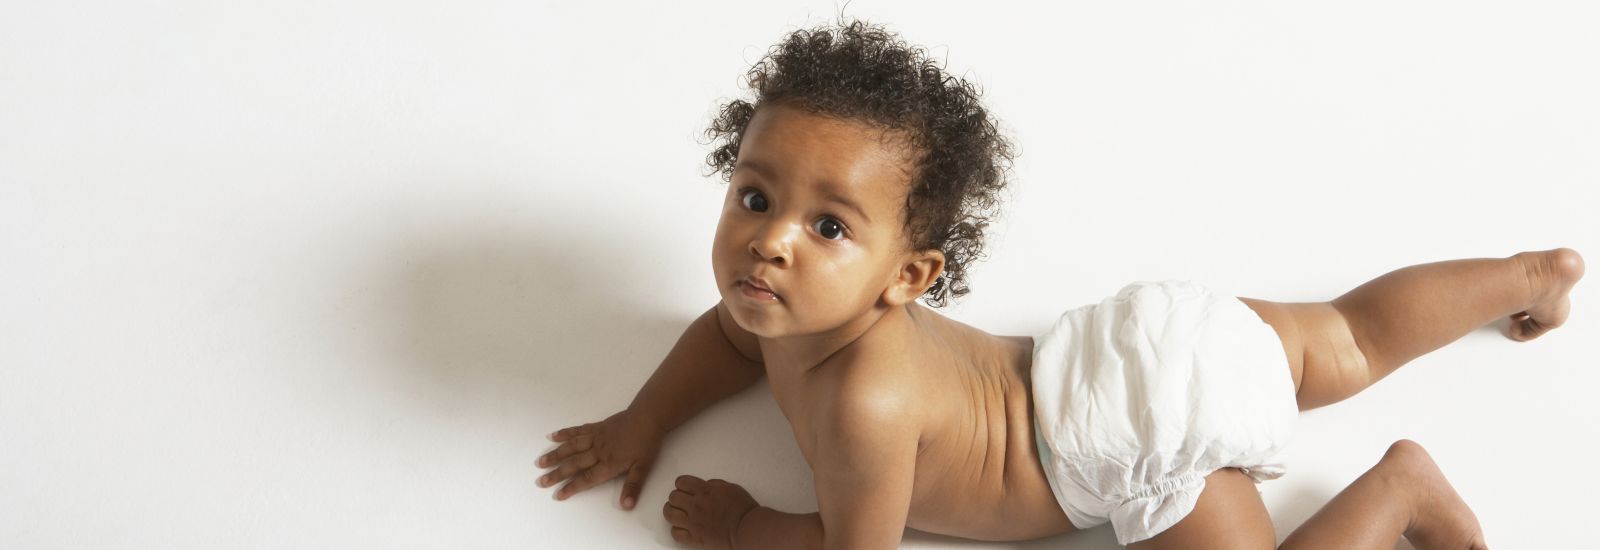 http://www.shutterstock.com/pic-144900370/stock-photo-high-angle-portrait-of-cute-baby-crawling-on-white-background.html?src=_LrYLXIUuJiuoCI-WAgq0g-1-7